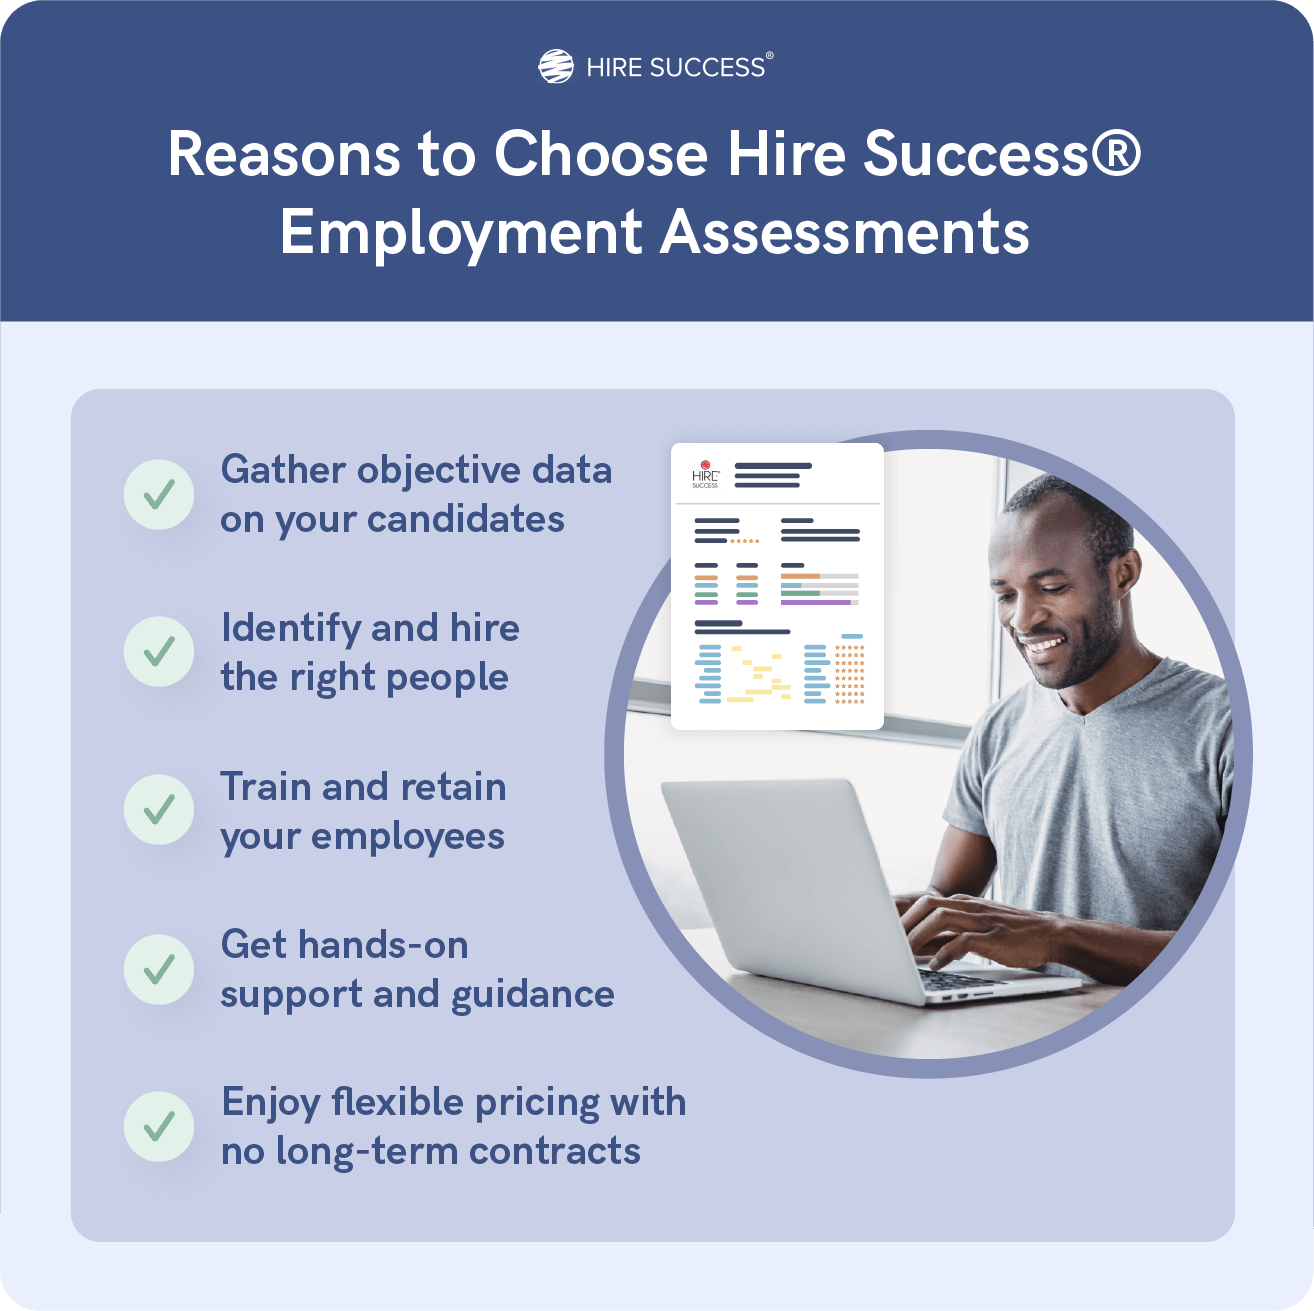 Reasons to choose hire success employment assessments.